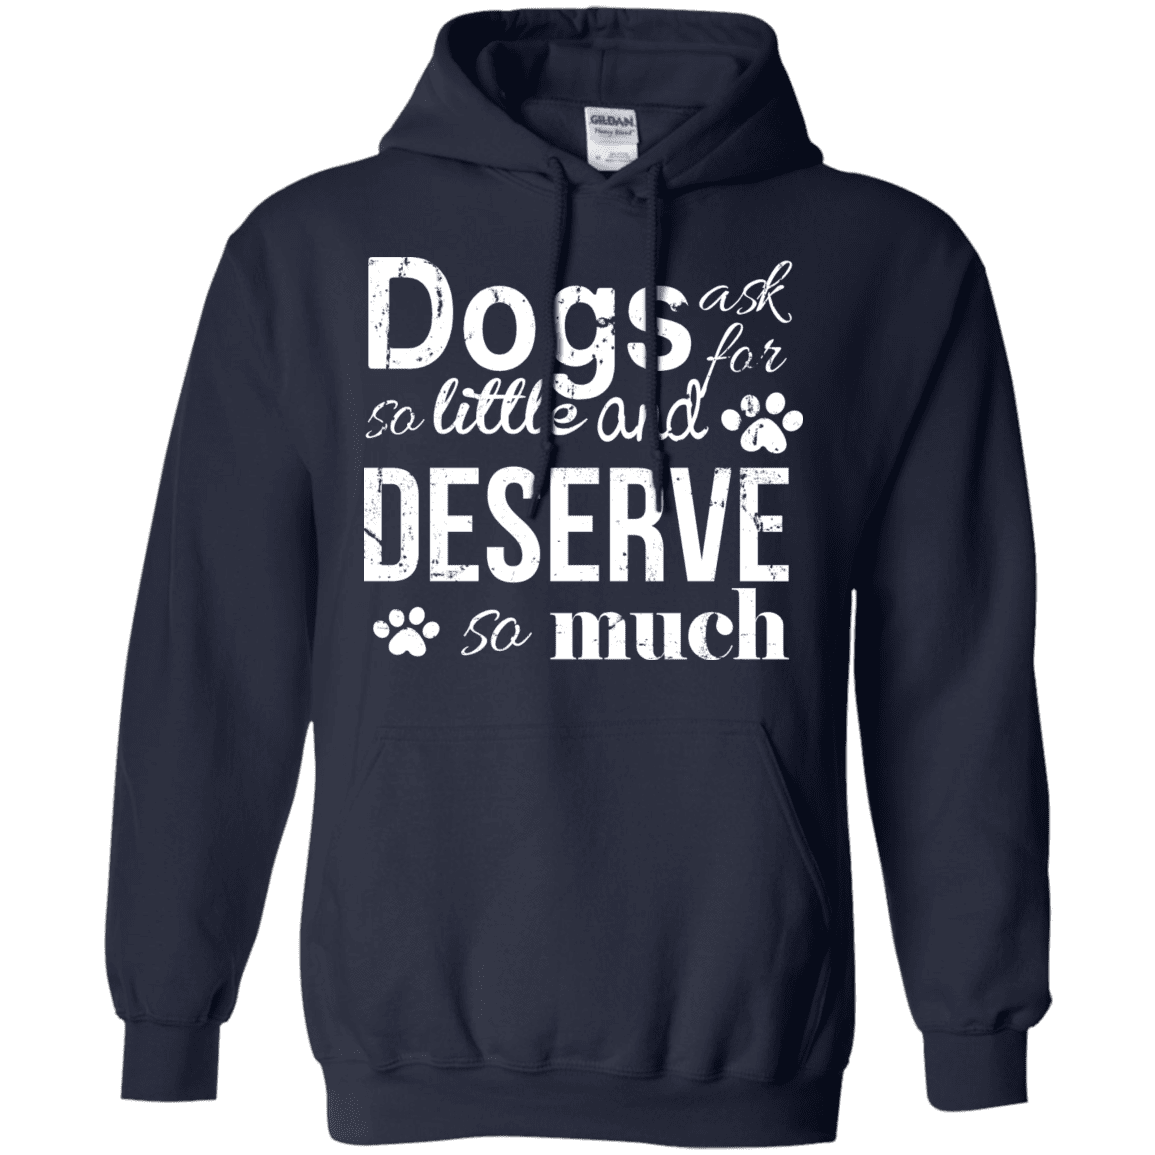 Dogs Deserve So Much - Hoodie.